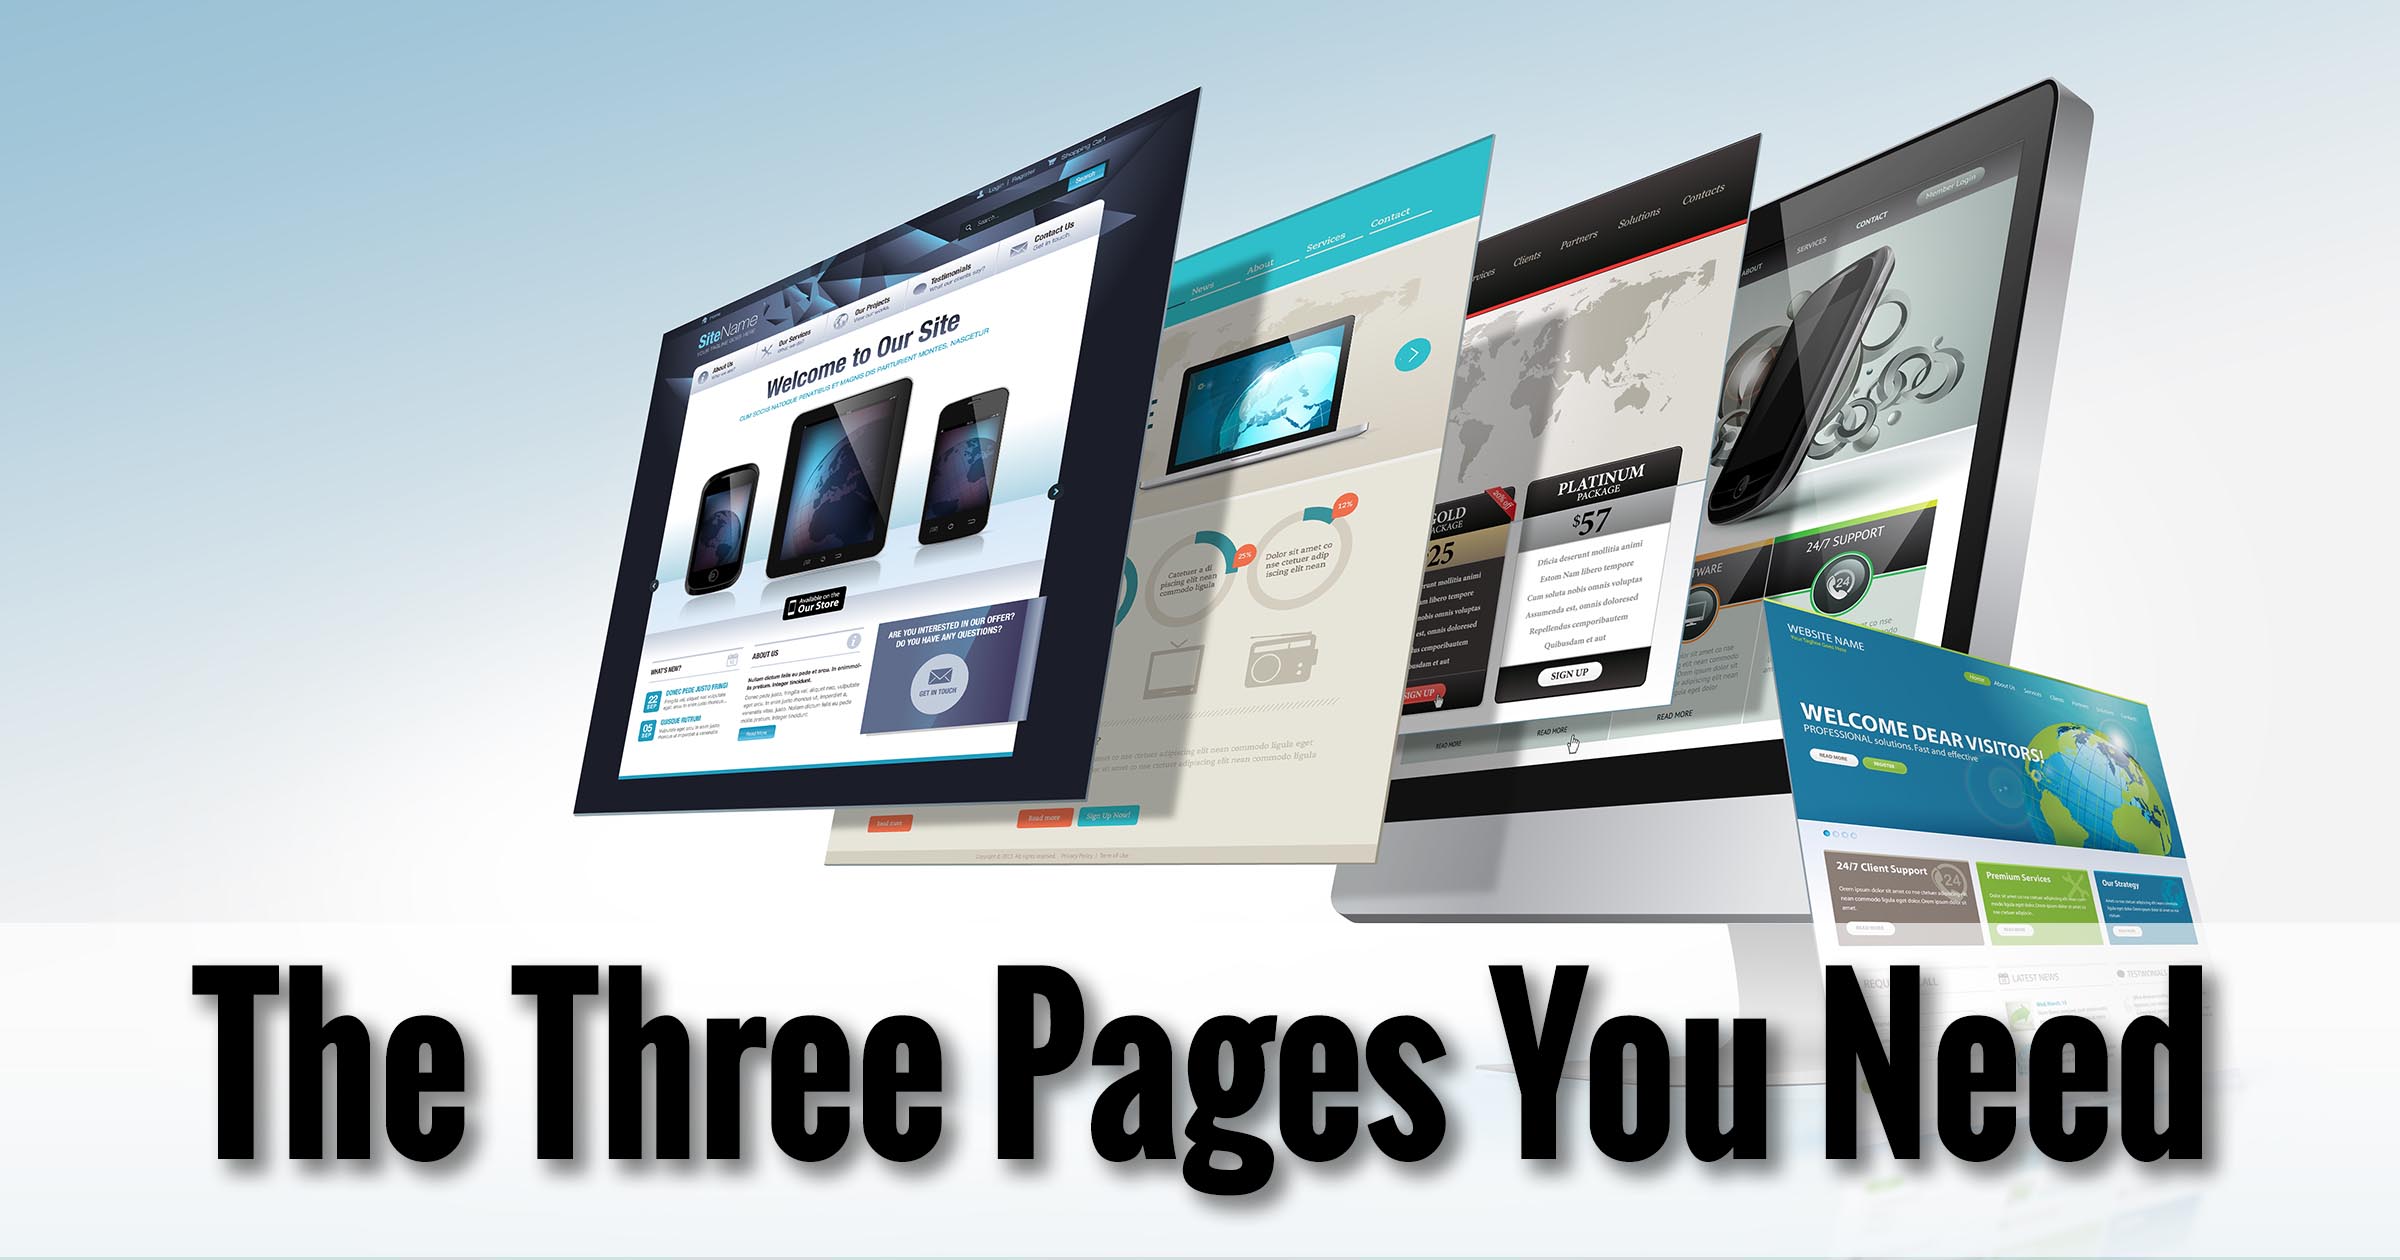 The Three Pages You Need